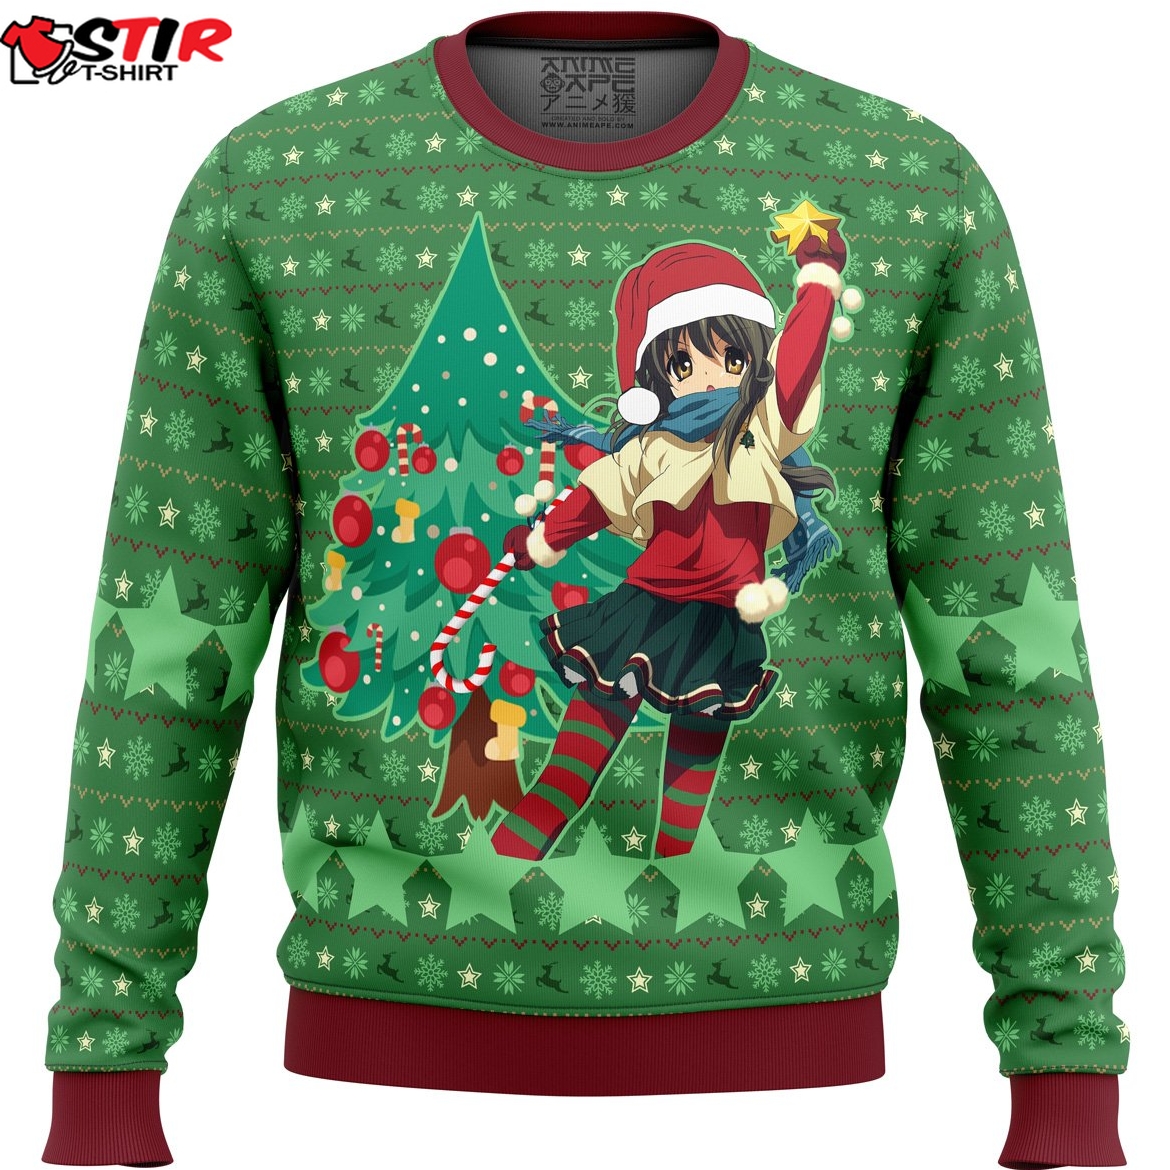 Clannad Wish Upon A Star This Christmas Ugly Christmas Sweater Stirtshirt